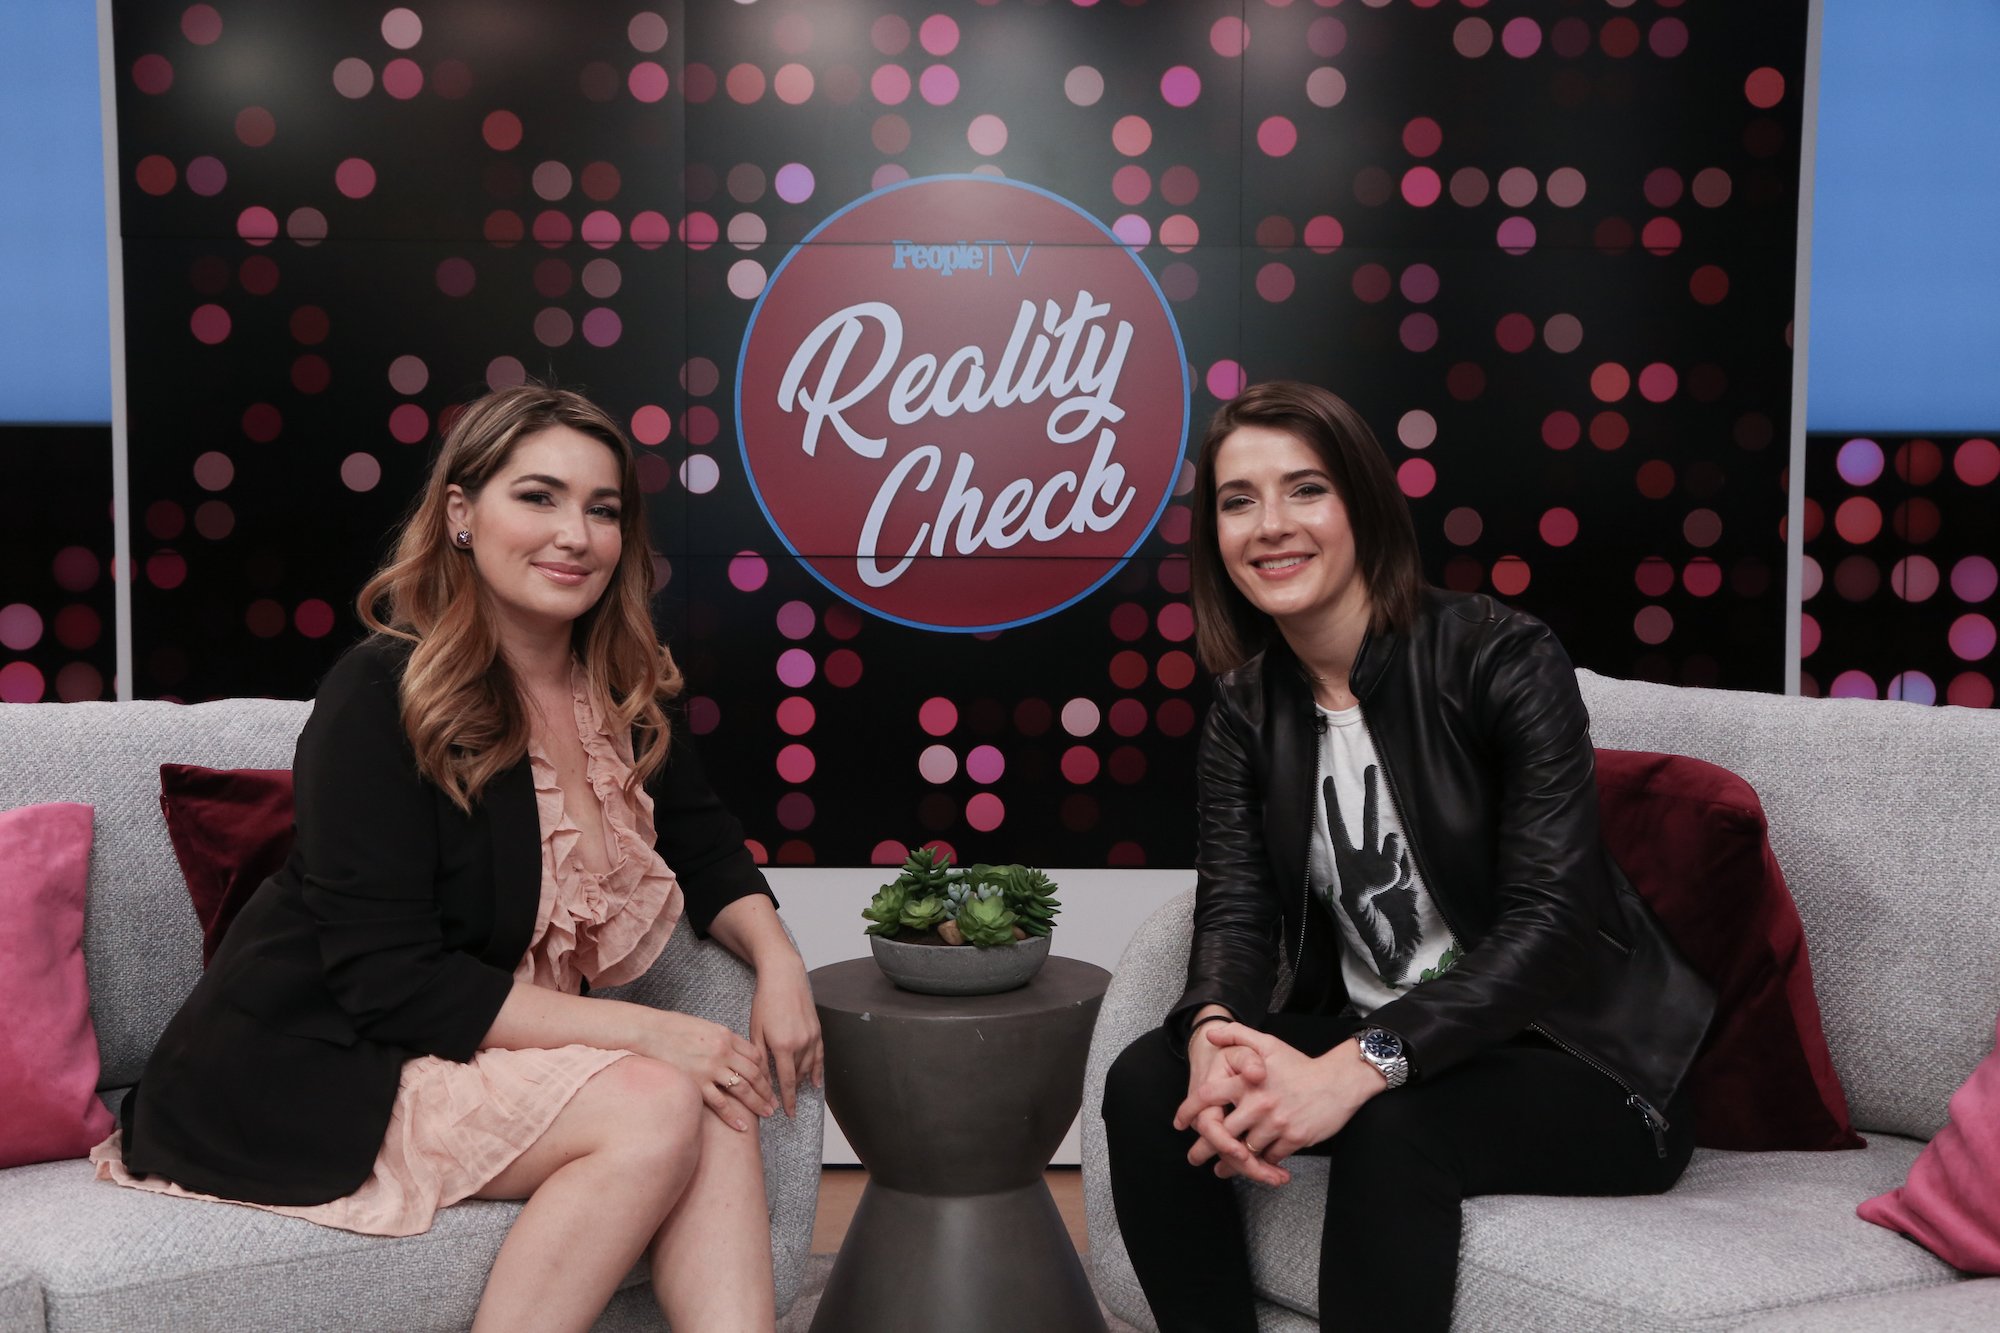 '90 Day Fiancé' star Stephanie Matto talks with host Daryn Carp on the set of "Reality Check" at PeopleTV Studios on March 03, 2020 in New York, United States